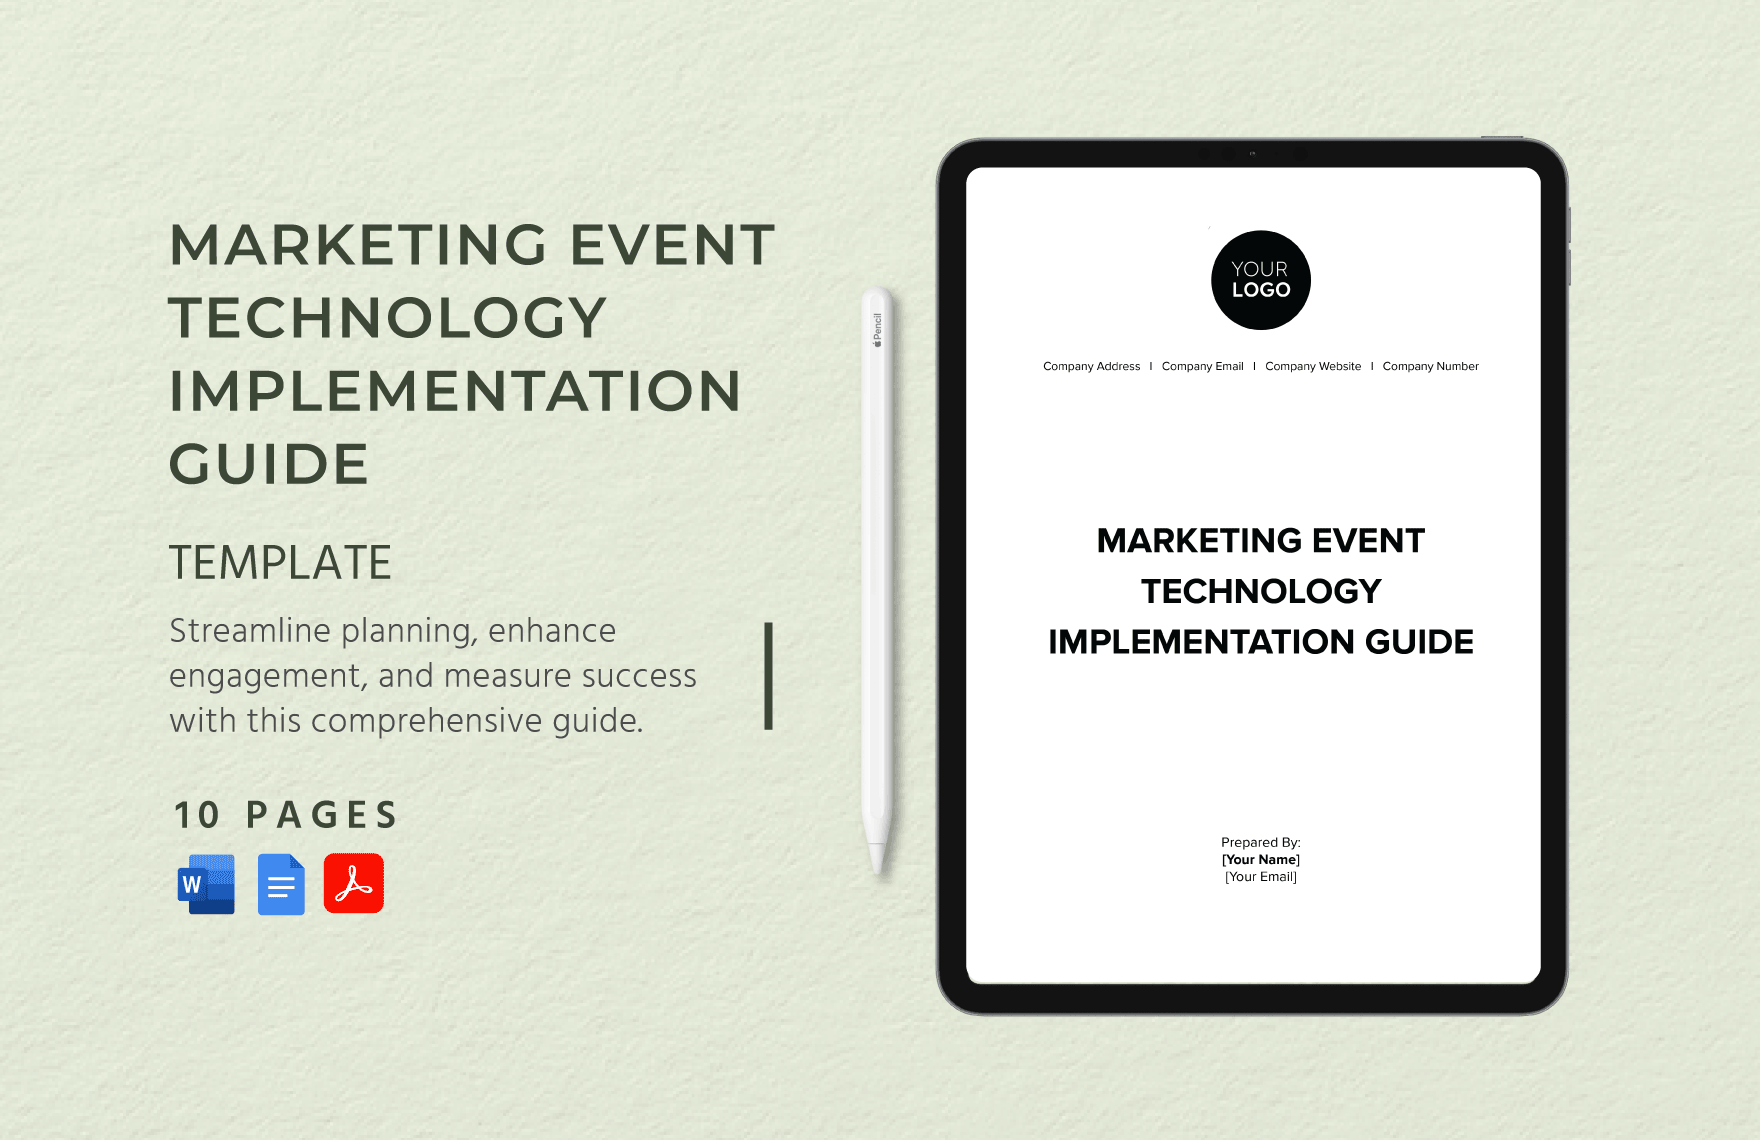 Marketing Event Technology Implementation Guide Template